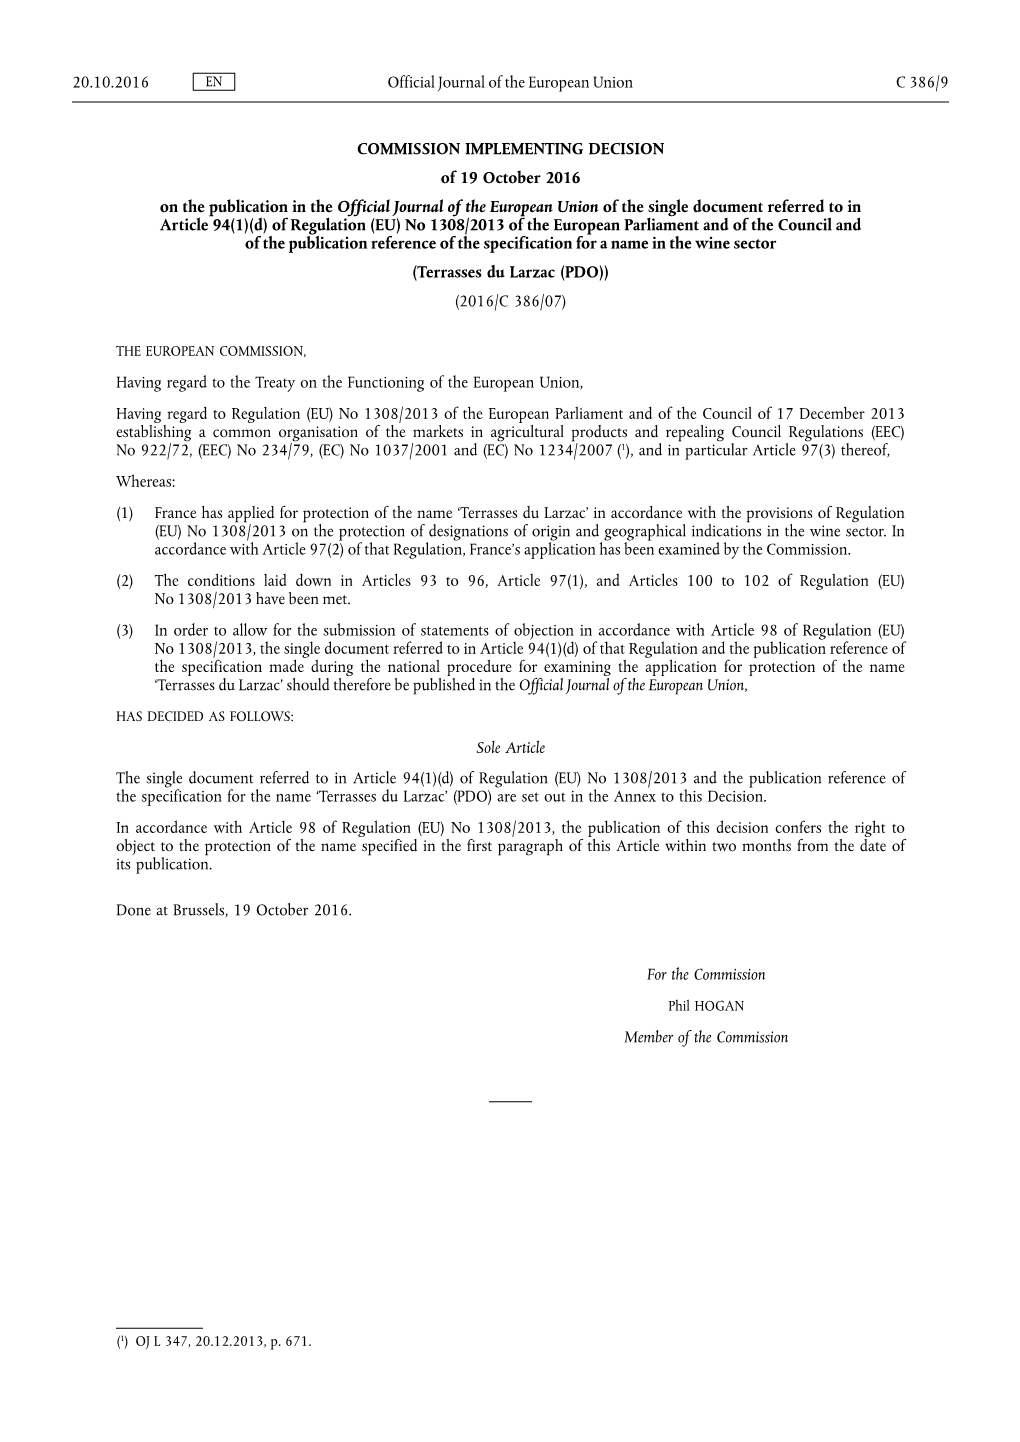 Commission Implementing Decision of 19 October 2016